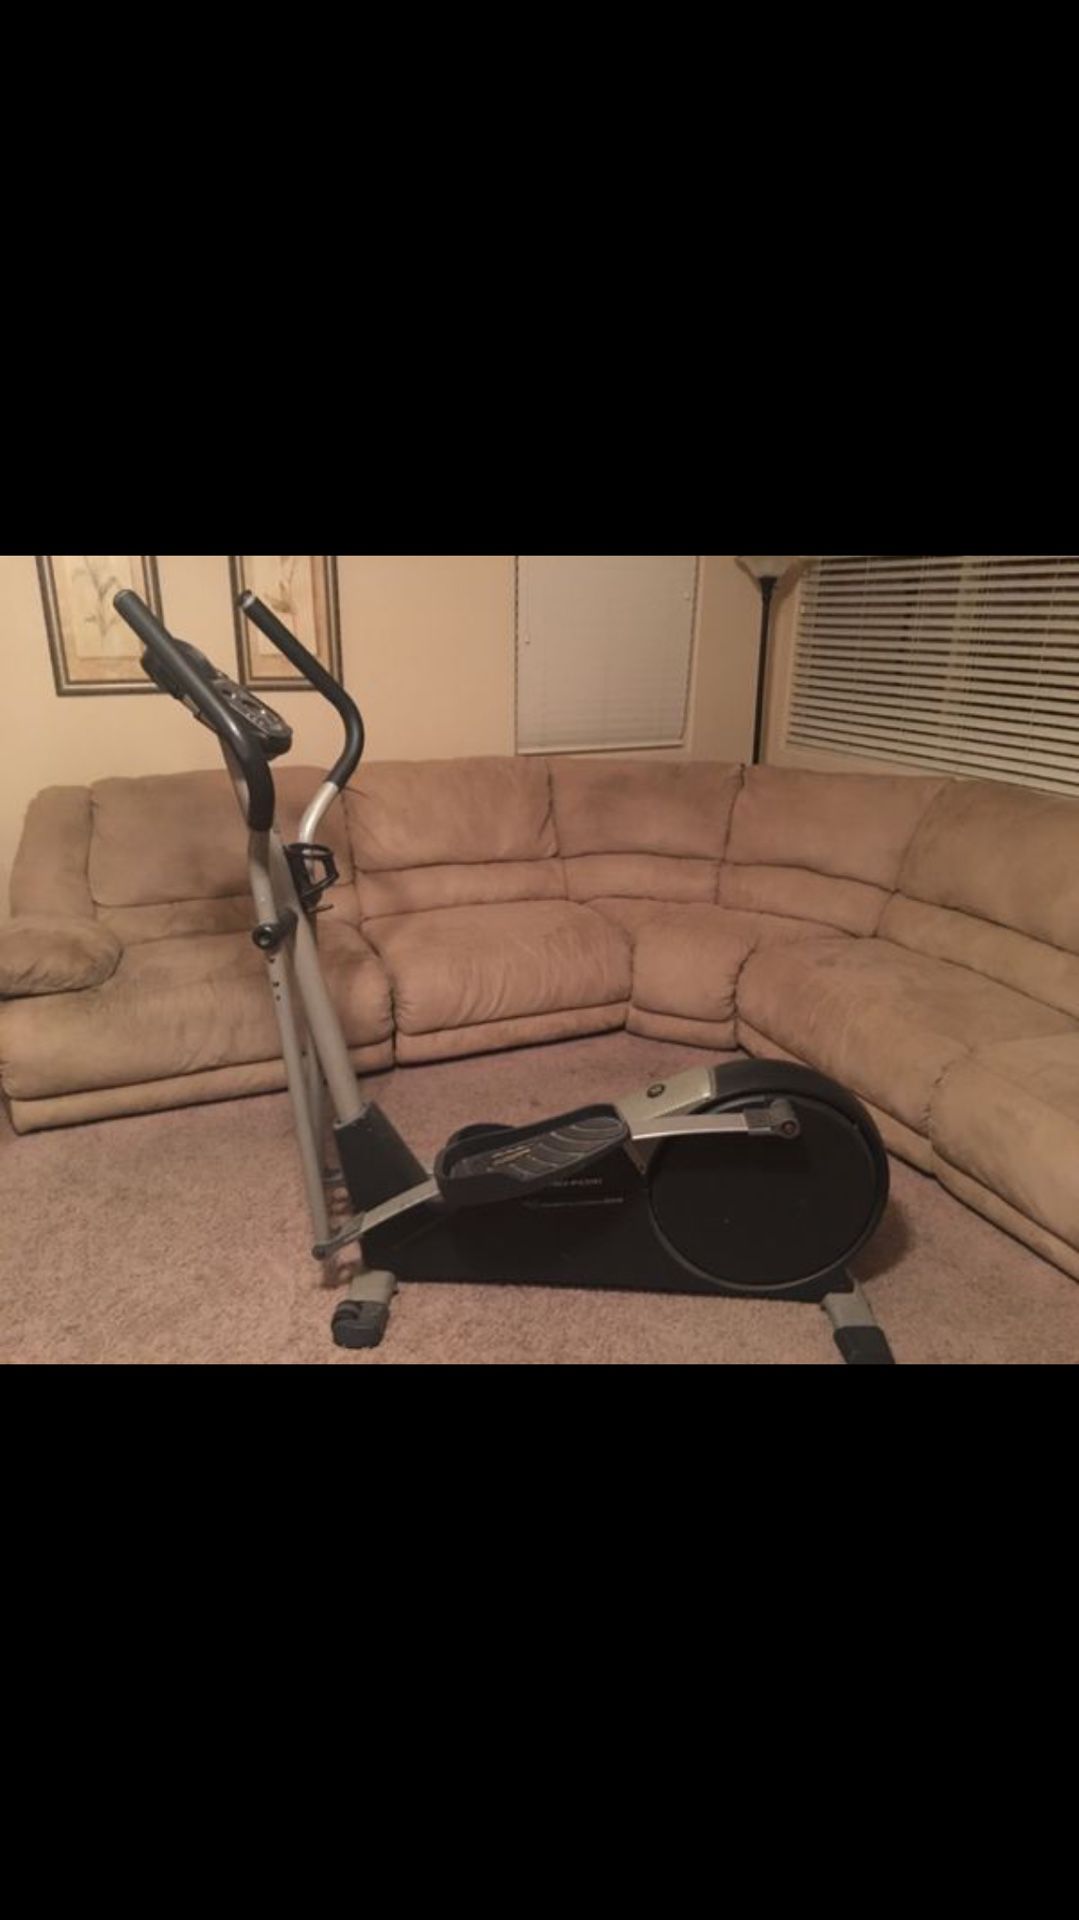 Exercise equipment both for $40